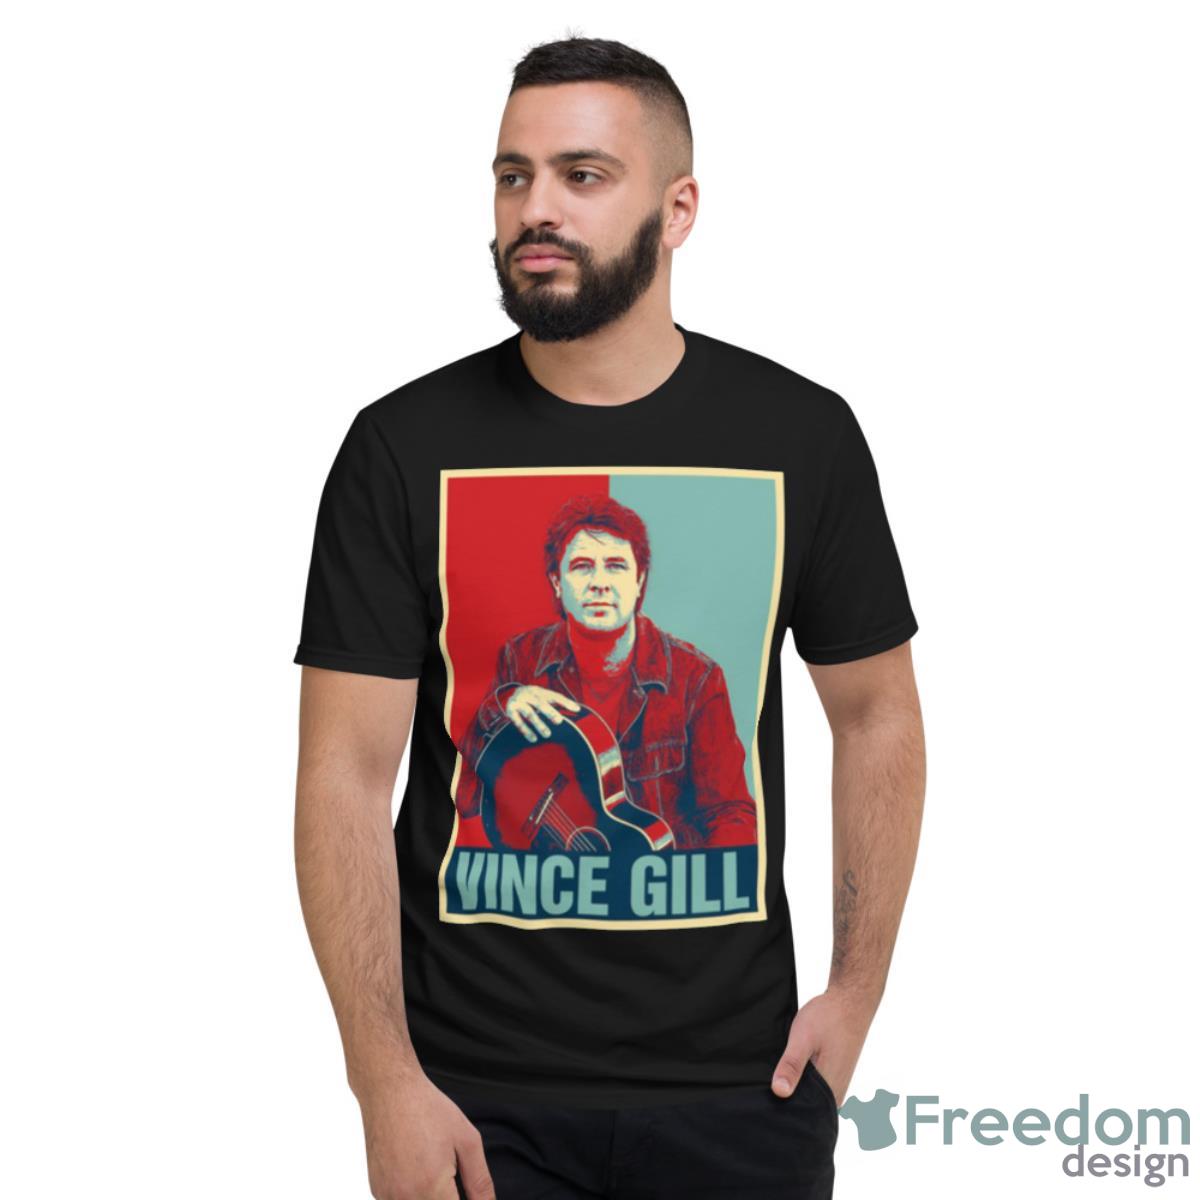 Most Important Style Vince Gill Shirt